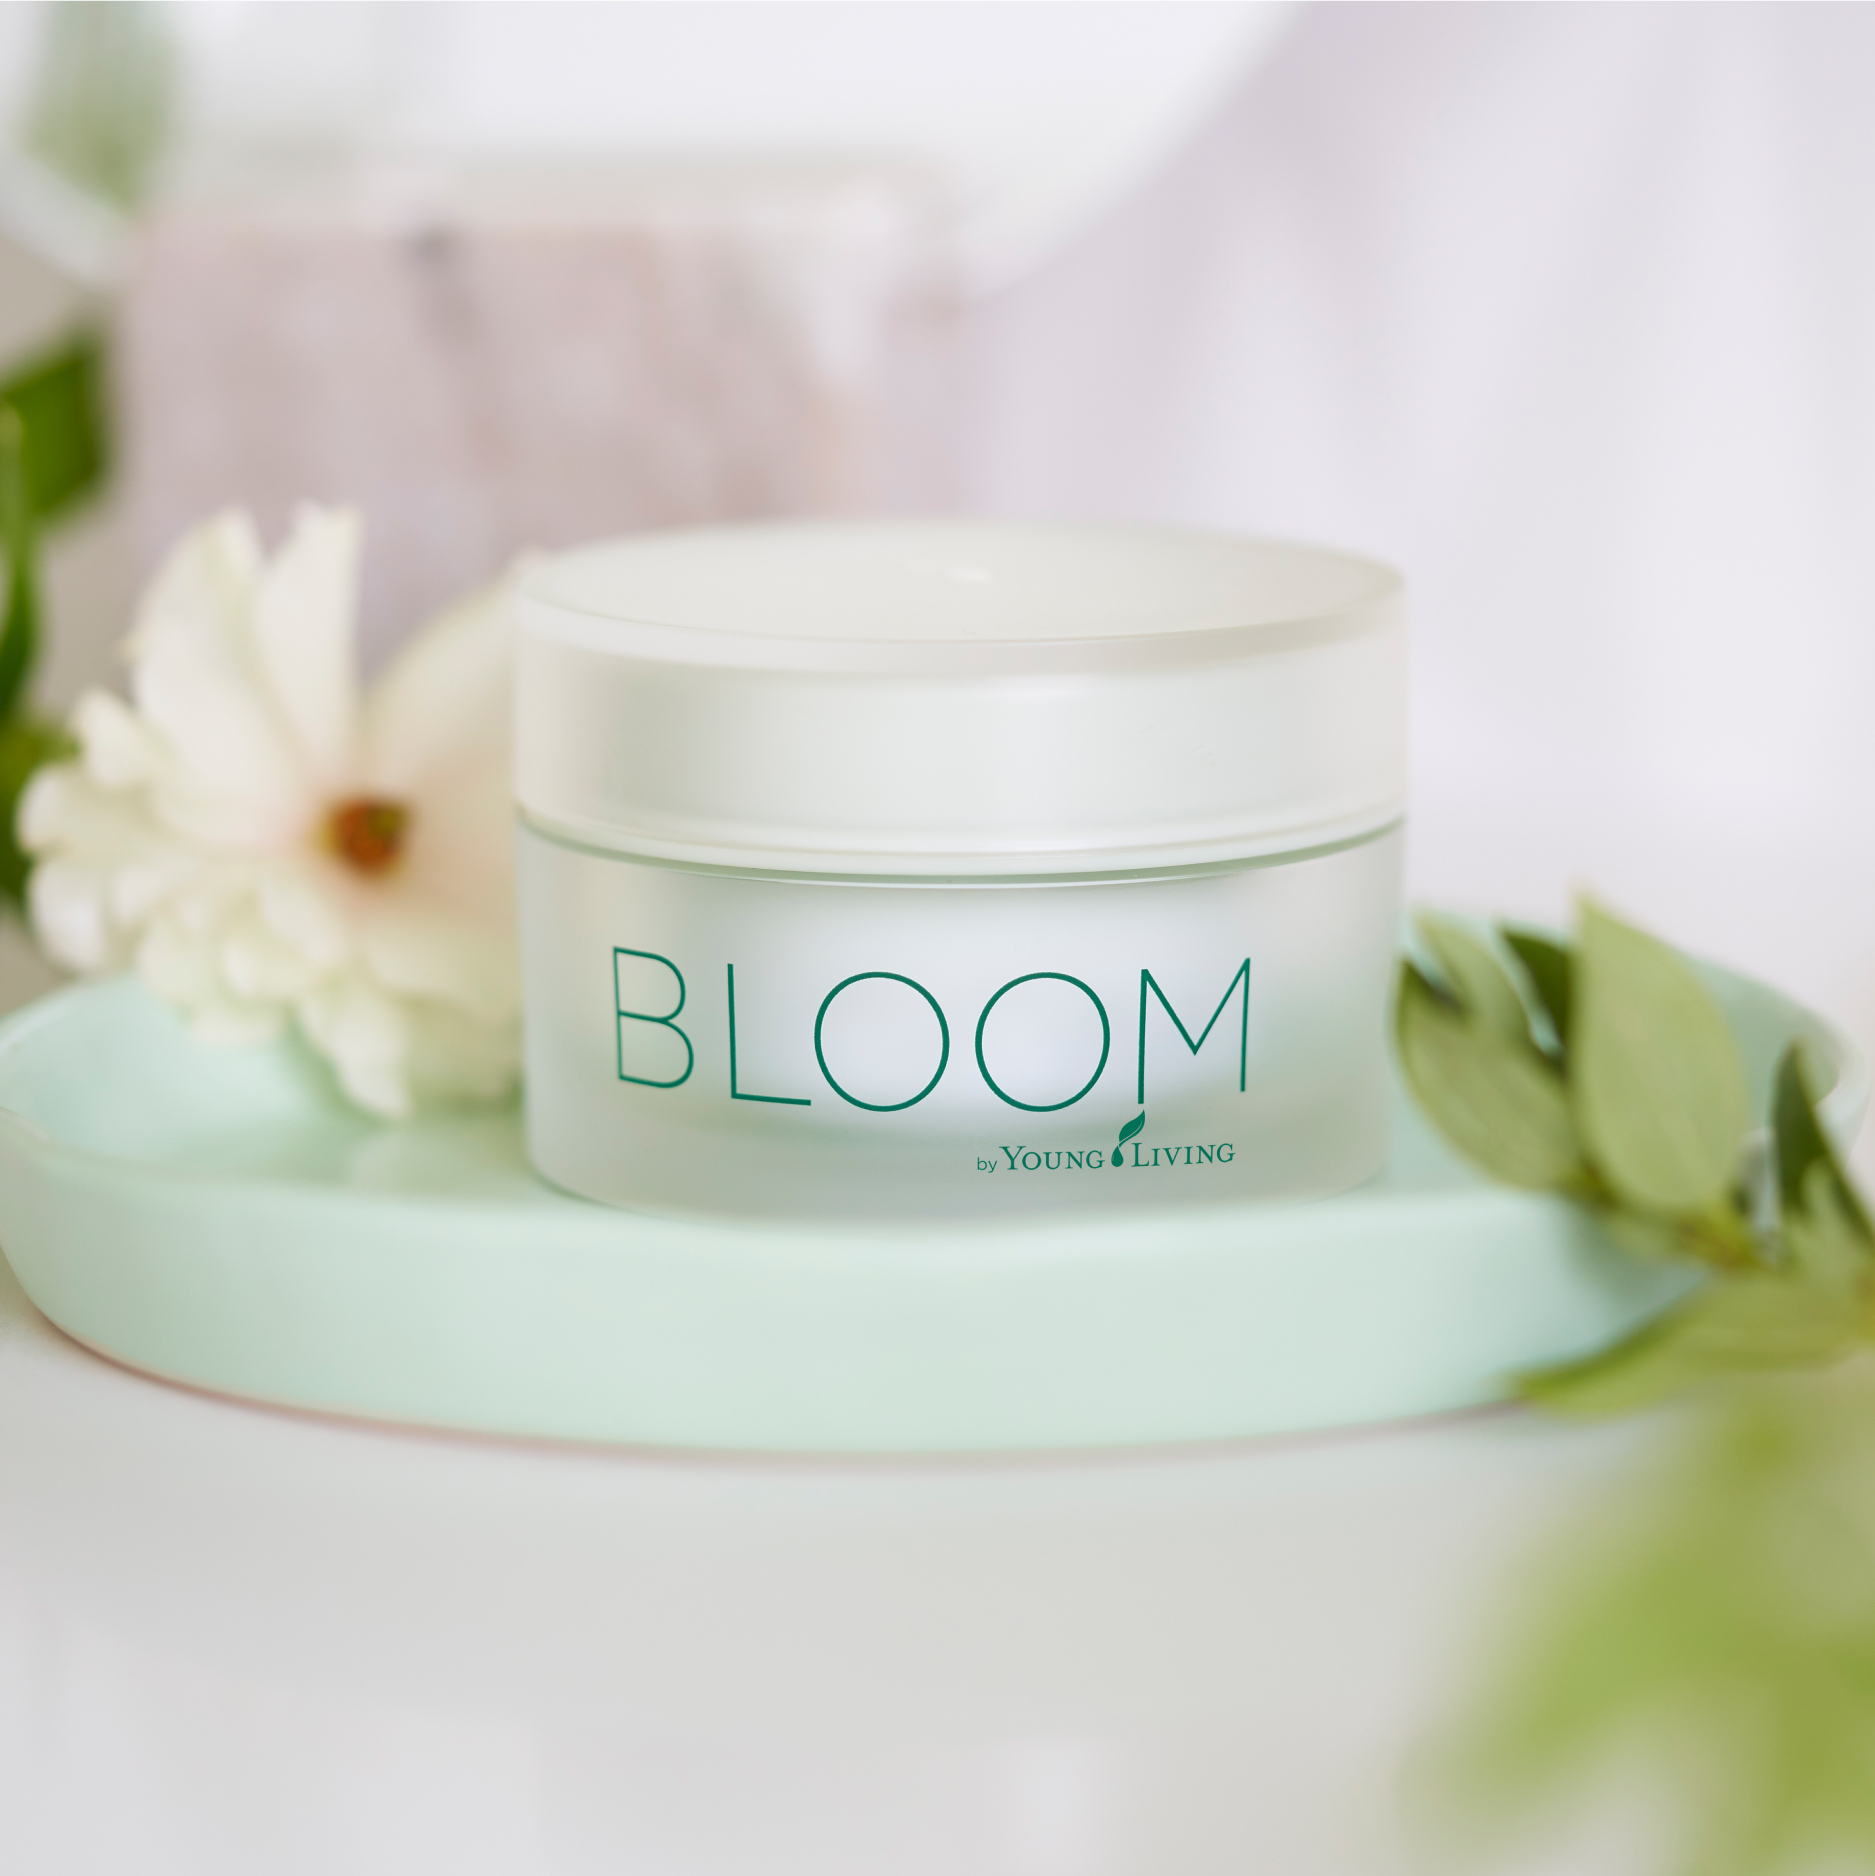 BLOOM by Young Living Brightening Cream